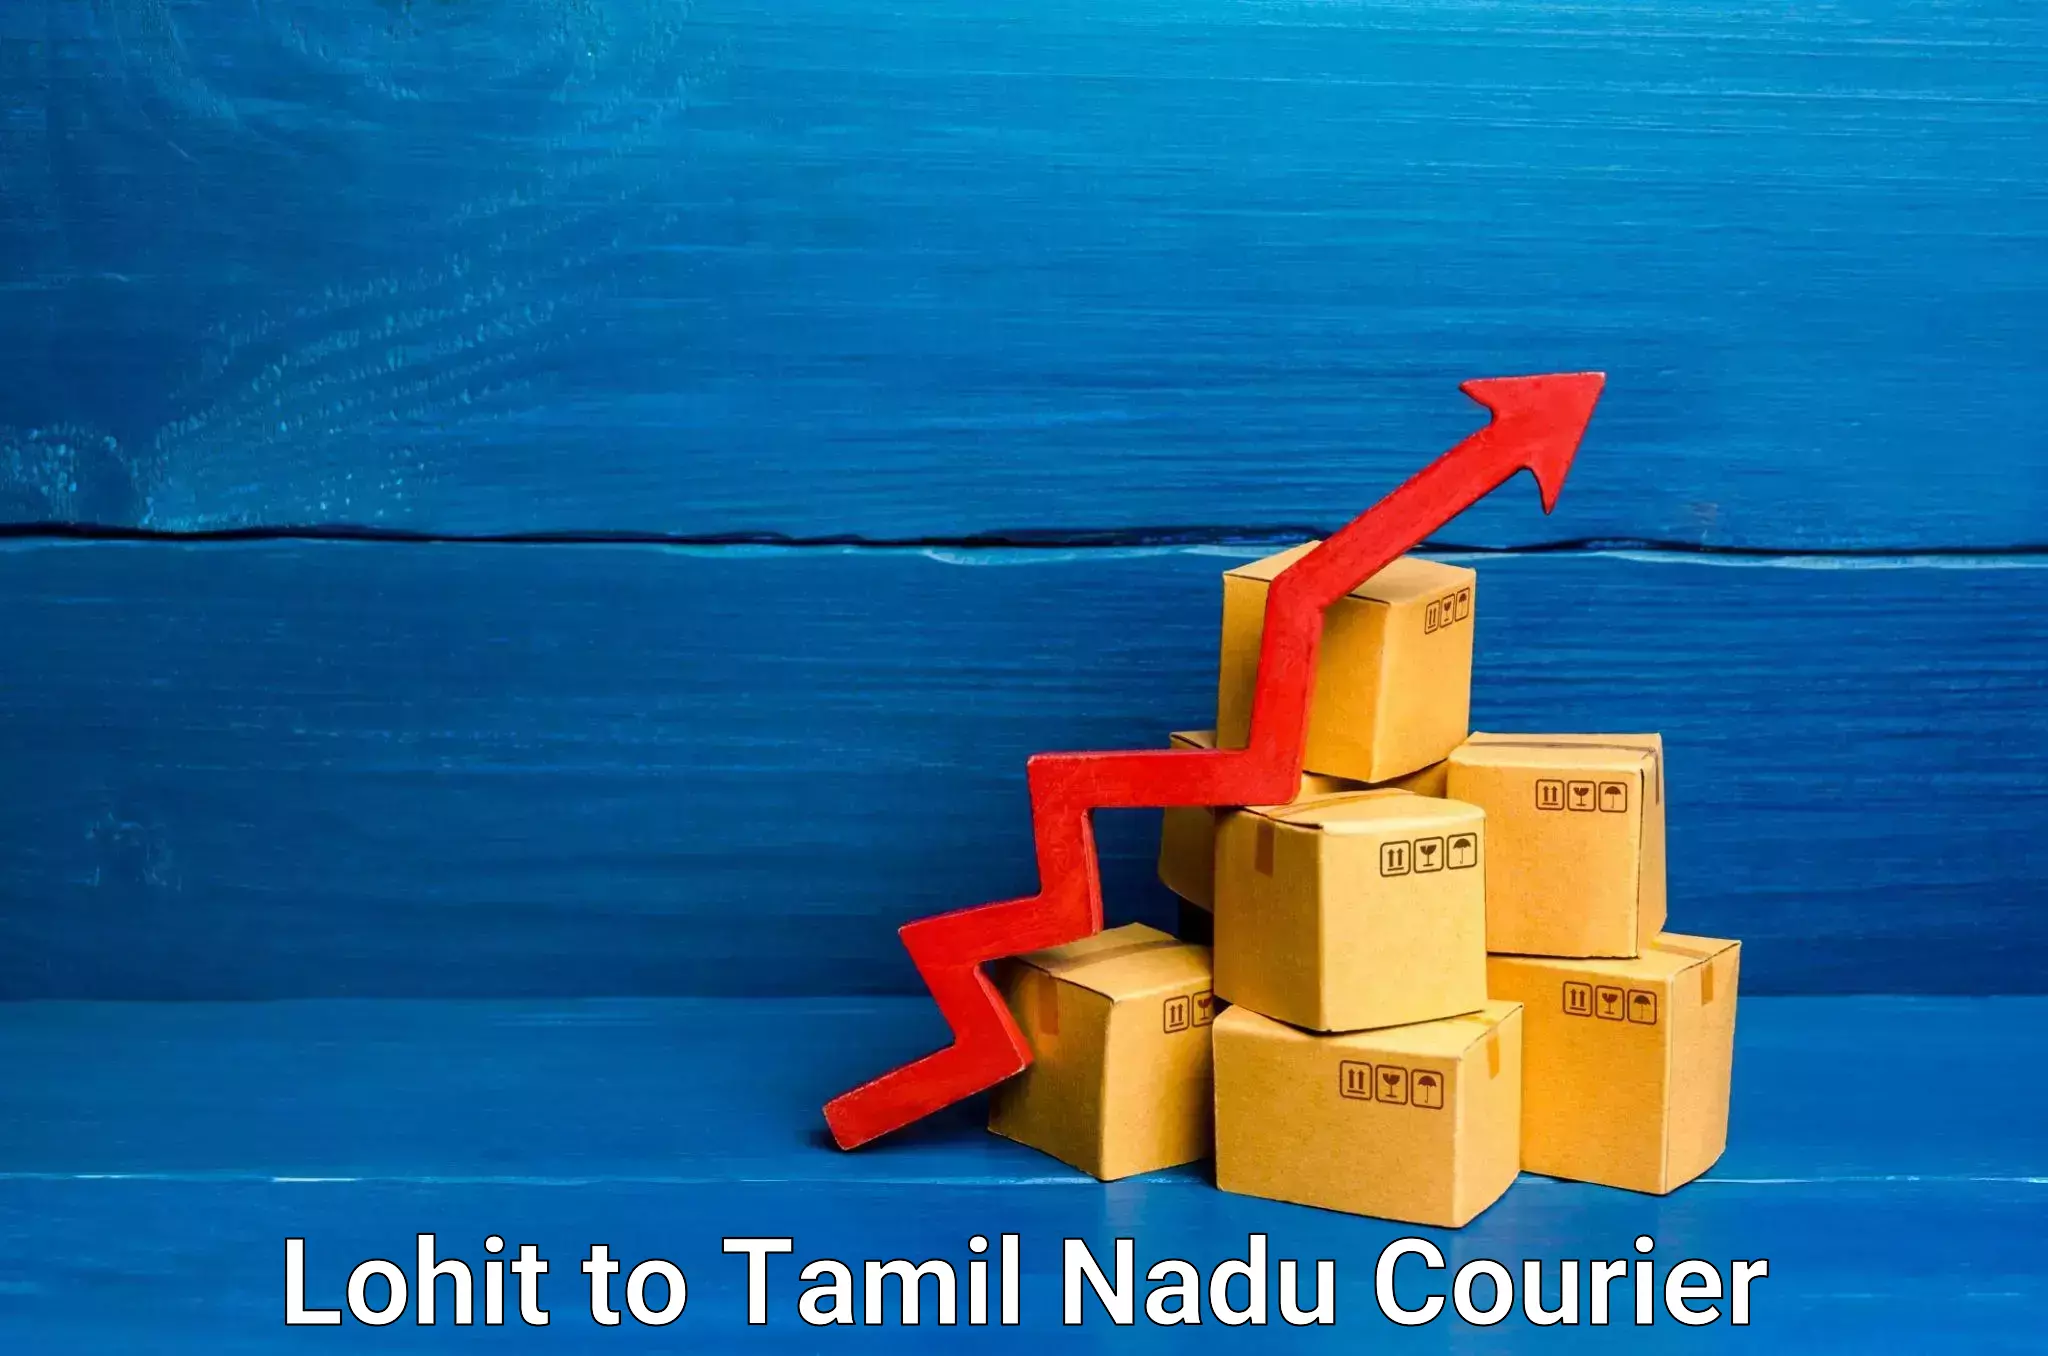 Budget-friendly shipping Lohit to Meenakshi Academy of Higher Education and Research Chennai